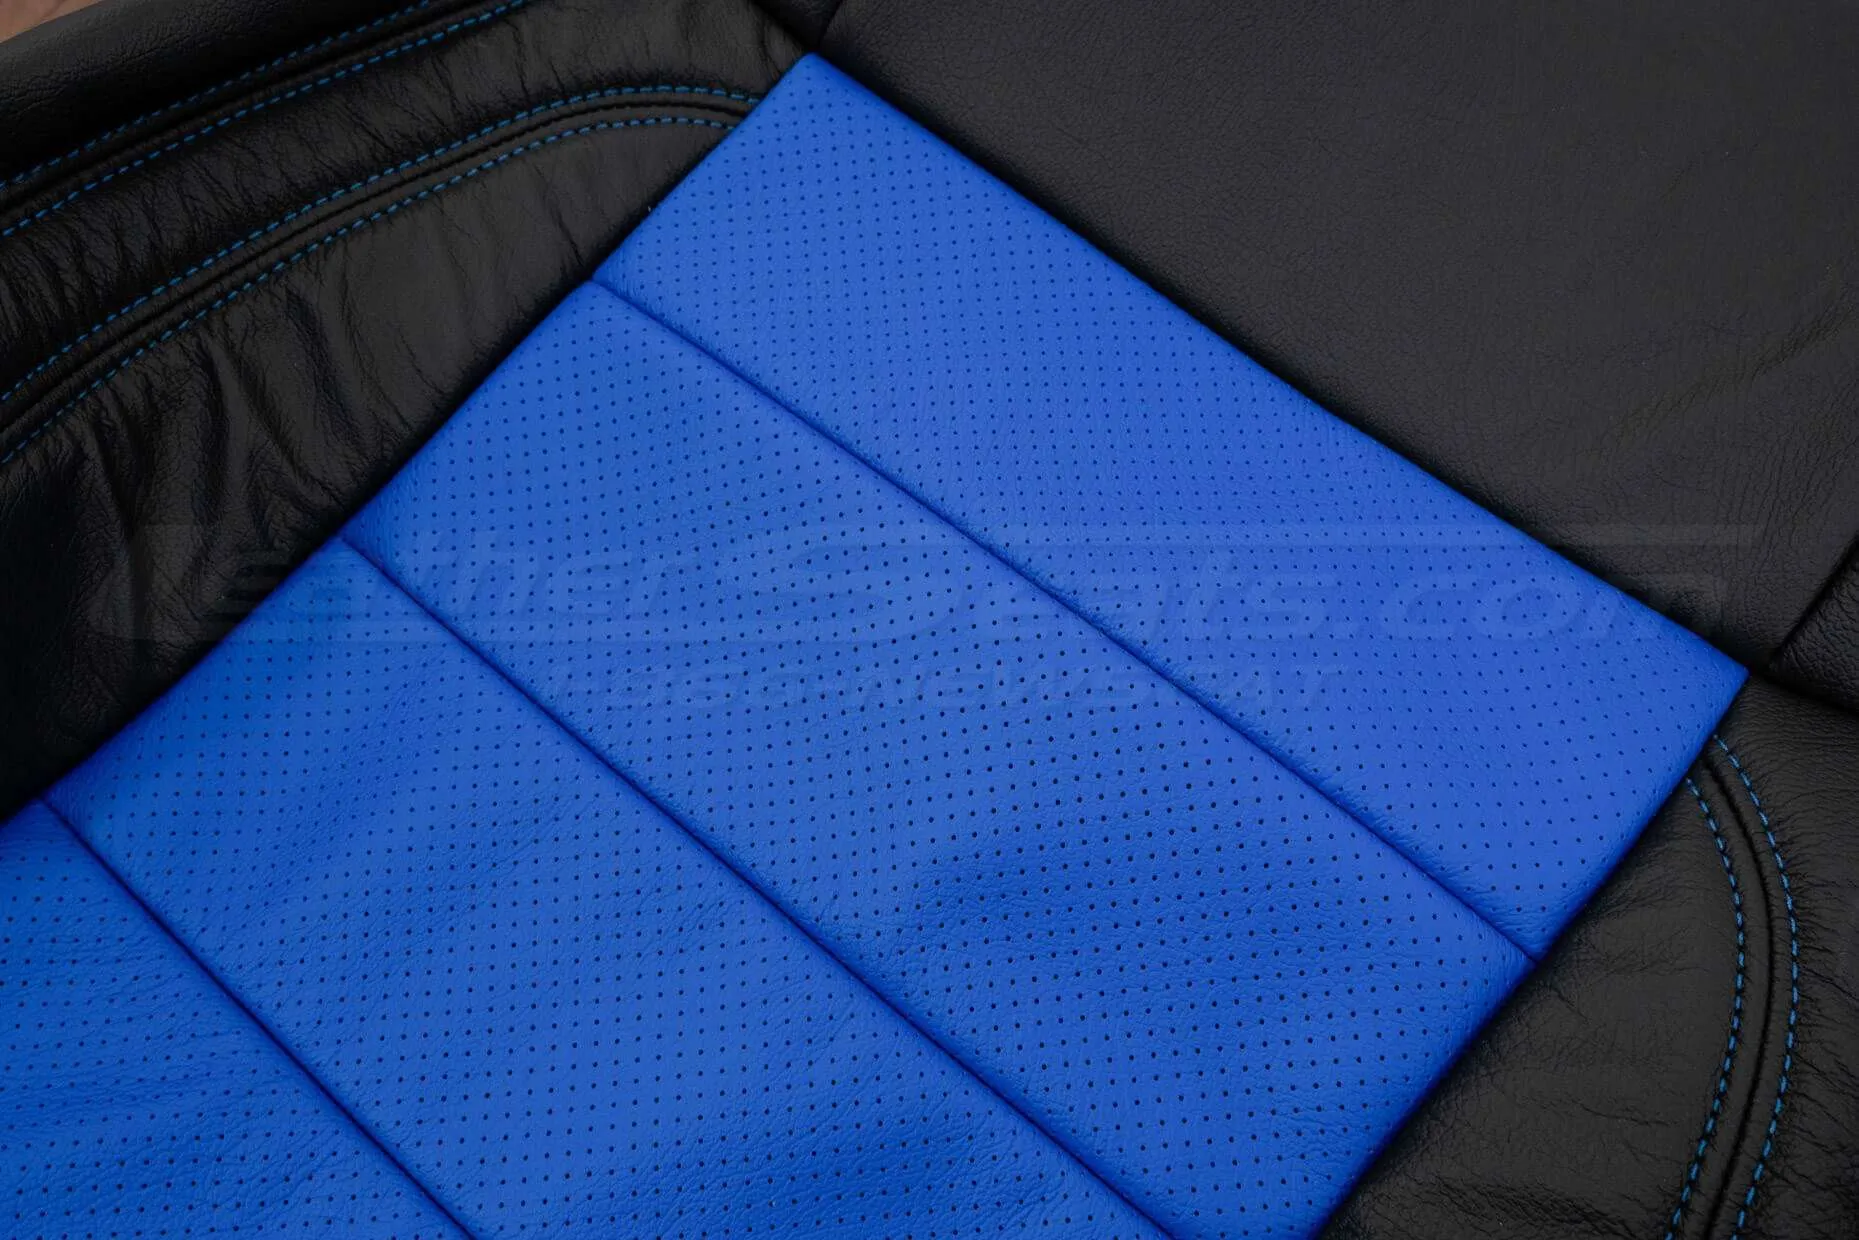 Perforated Insert close-up